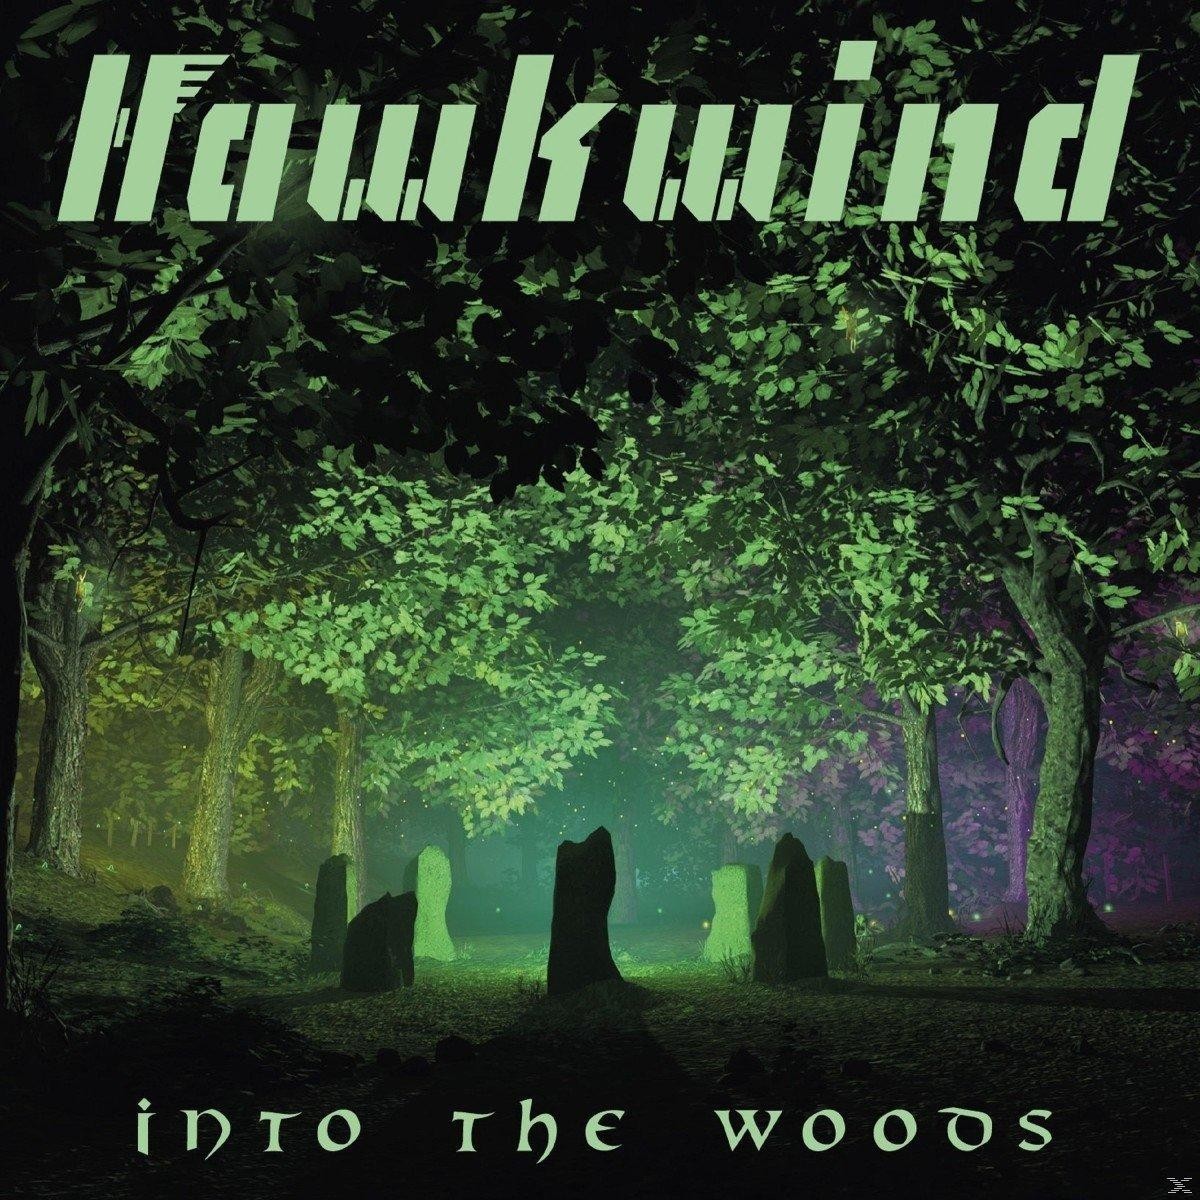 Woods Hawkwind (CD) - The - Into